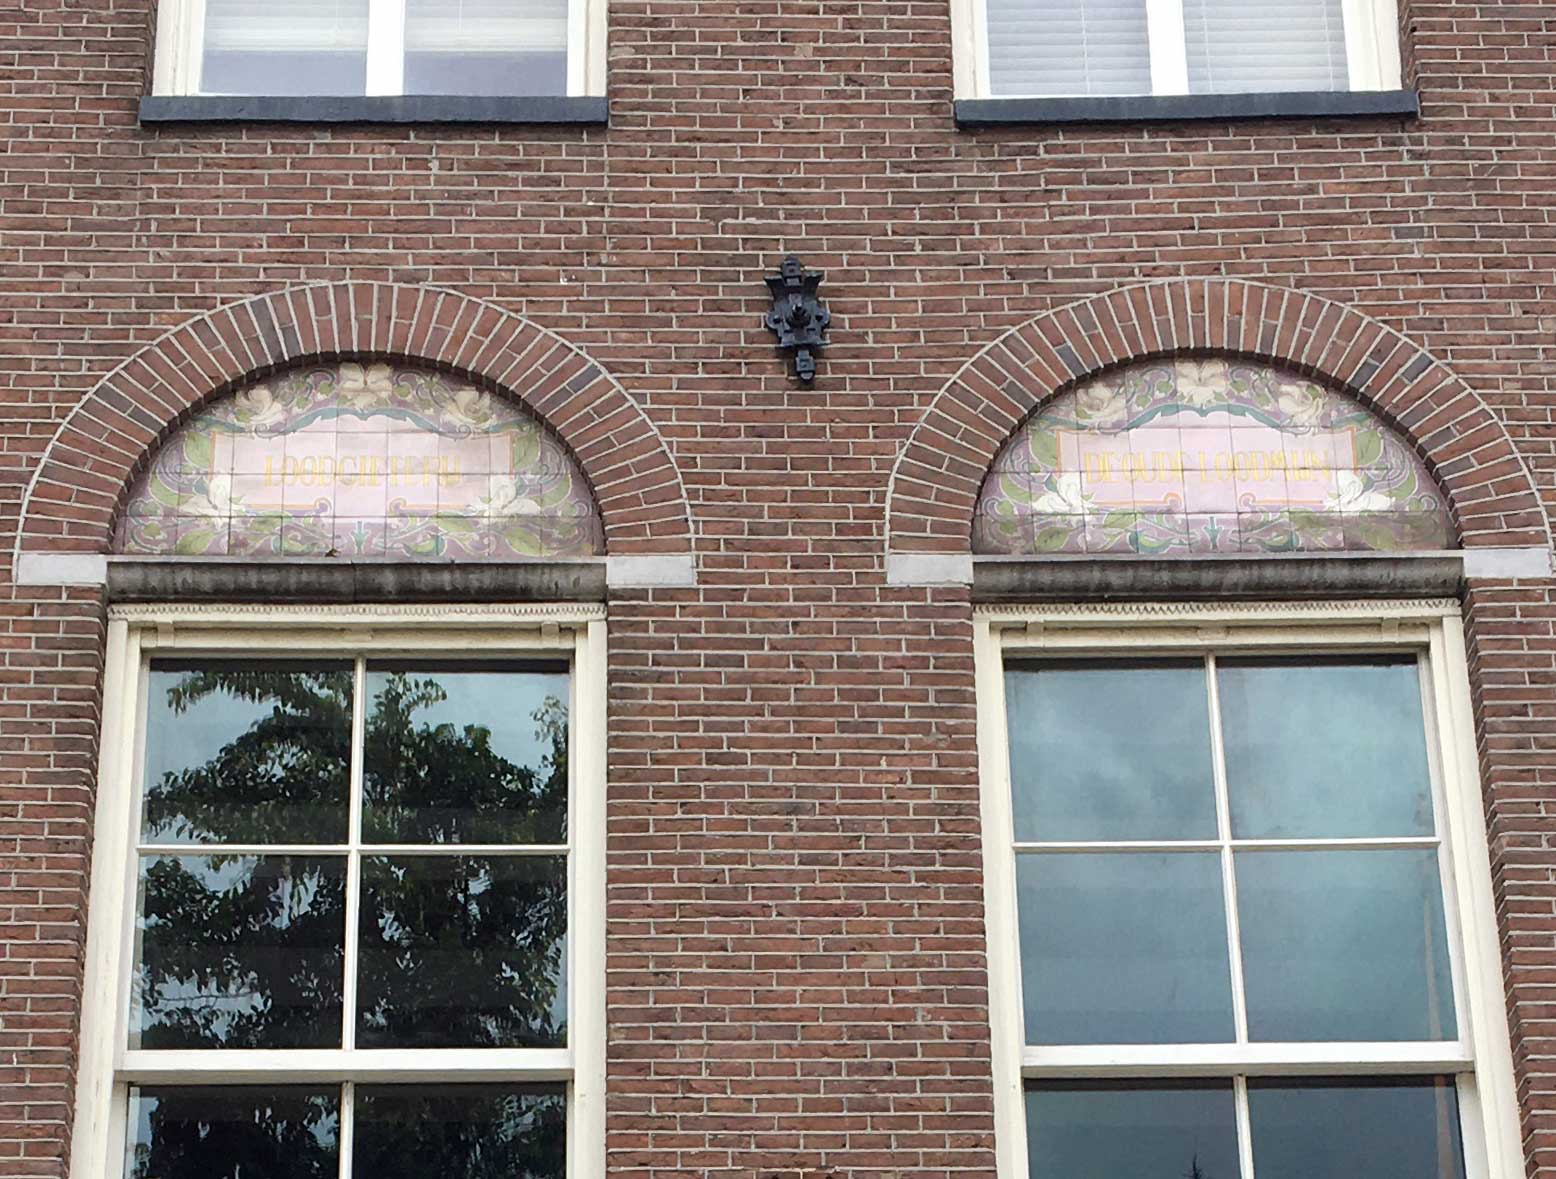 Rokin 87-89, Amsterdam, close-up of the tiles above the windows